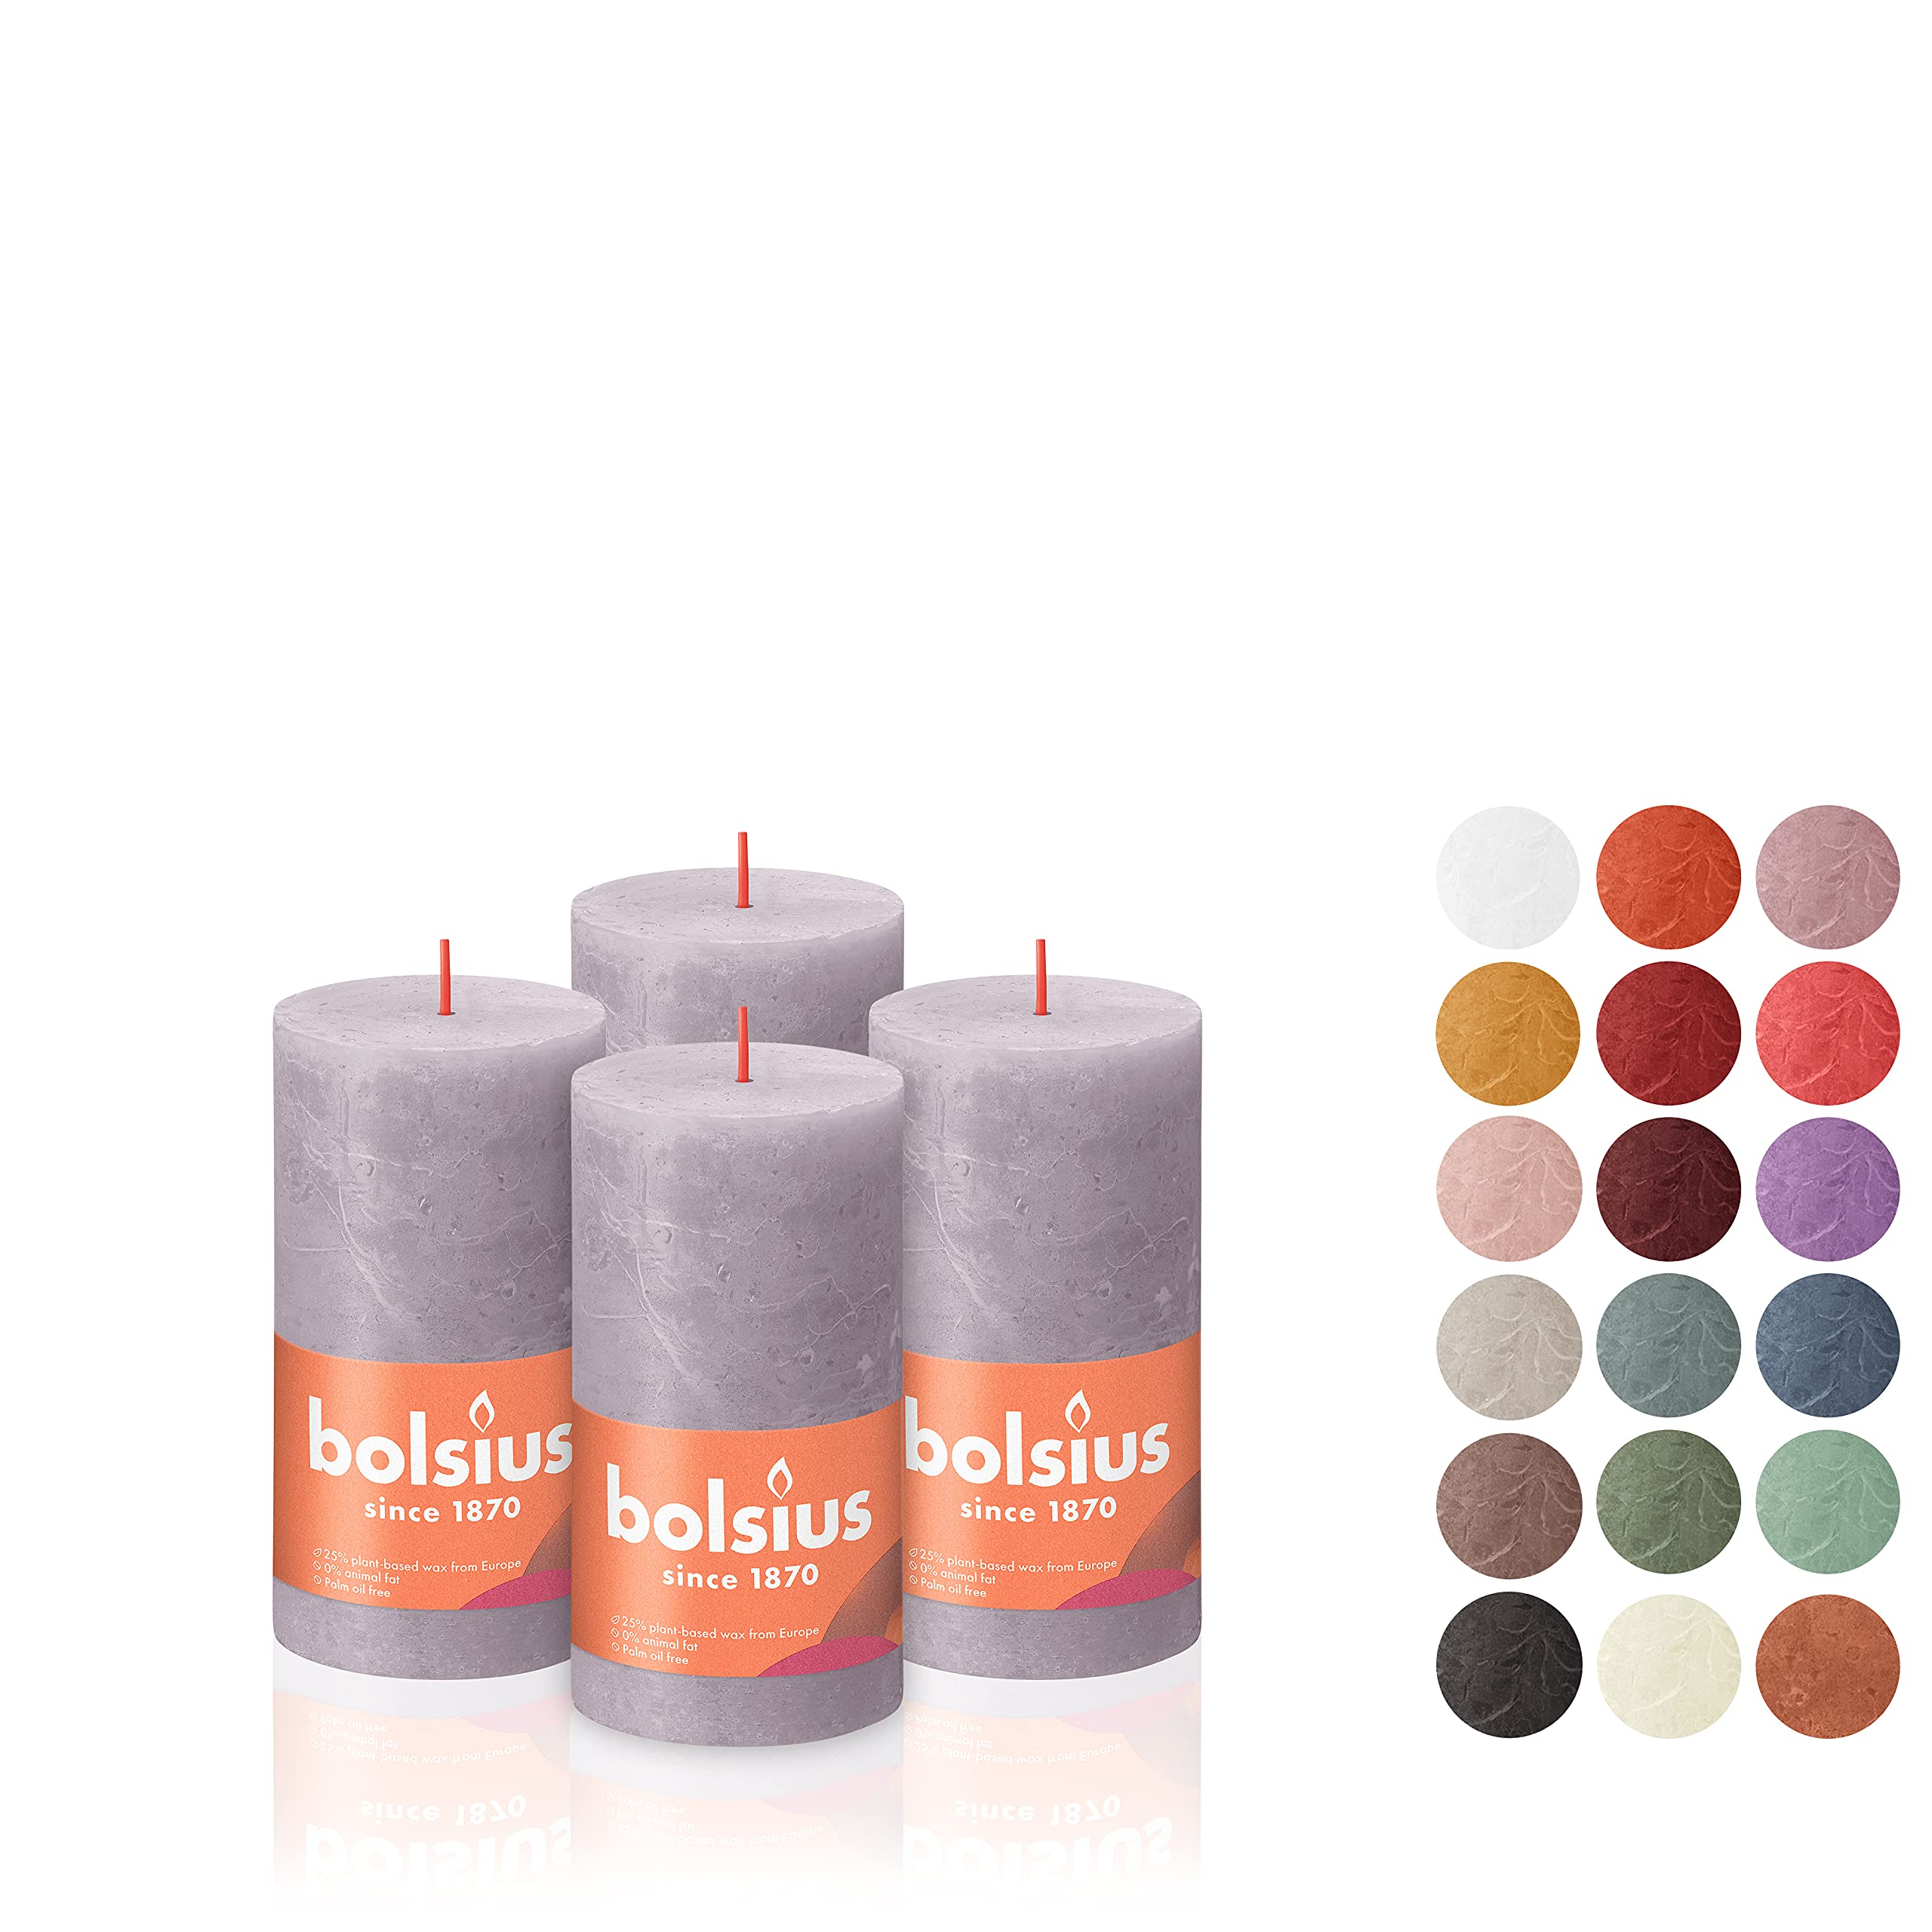 BOLSIUS 4 Pack Frosted Lavender Rustic Pillar Candles - 2 X 4 Inches - Premium European Quality - Includes Natural Plant-Based Wax - Unscented Dripless Smokeless 30 Hour Party and Wedding Candles  - Very Good